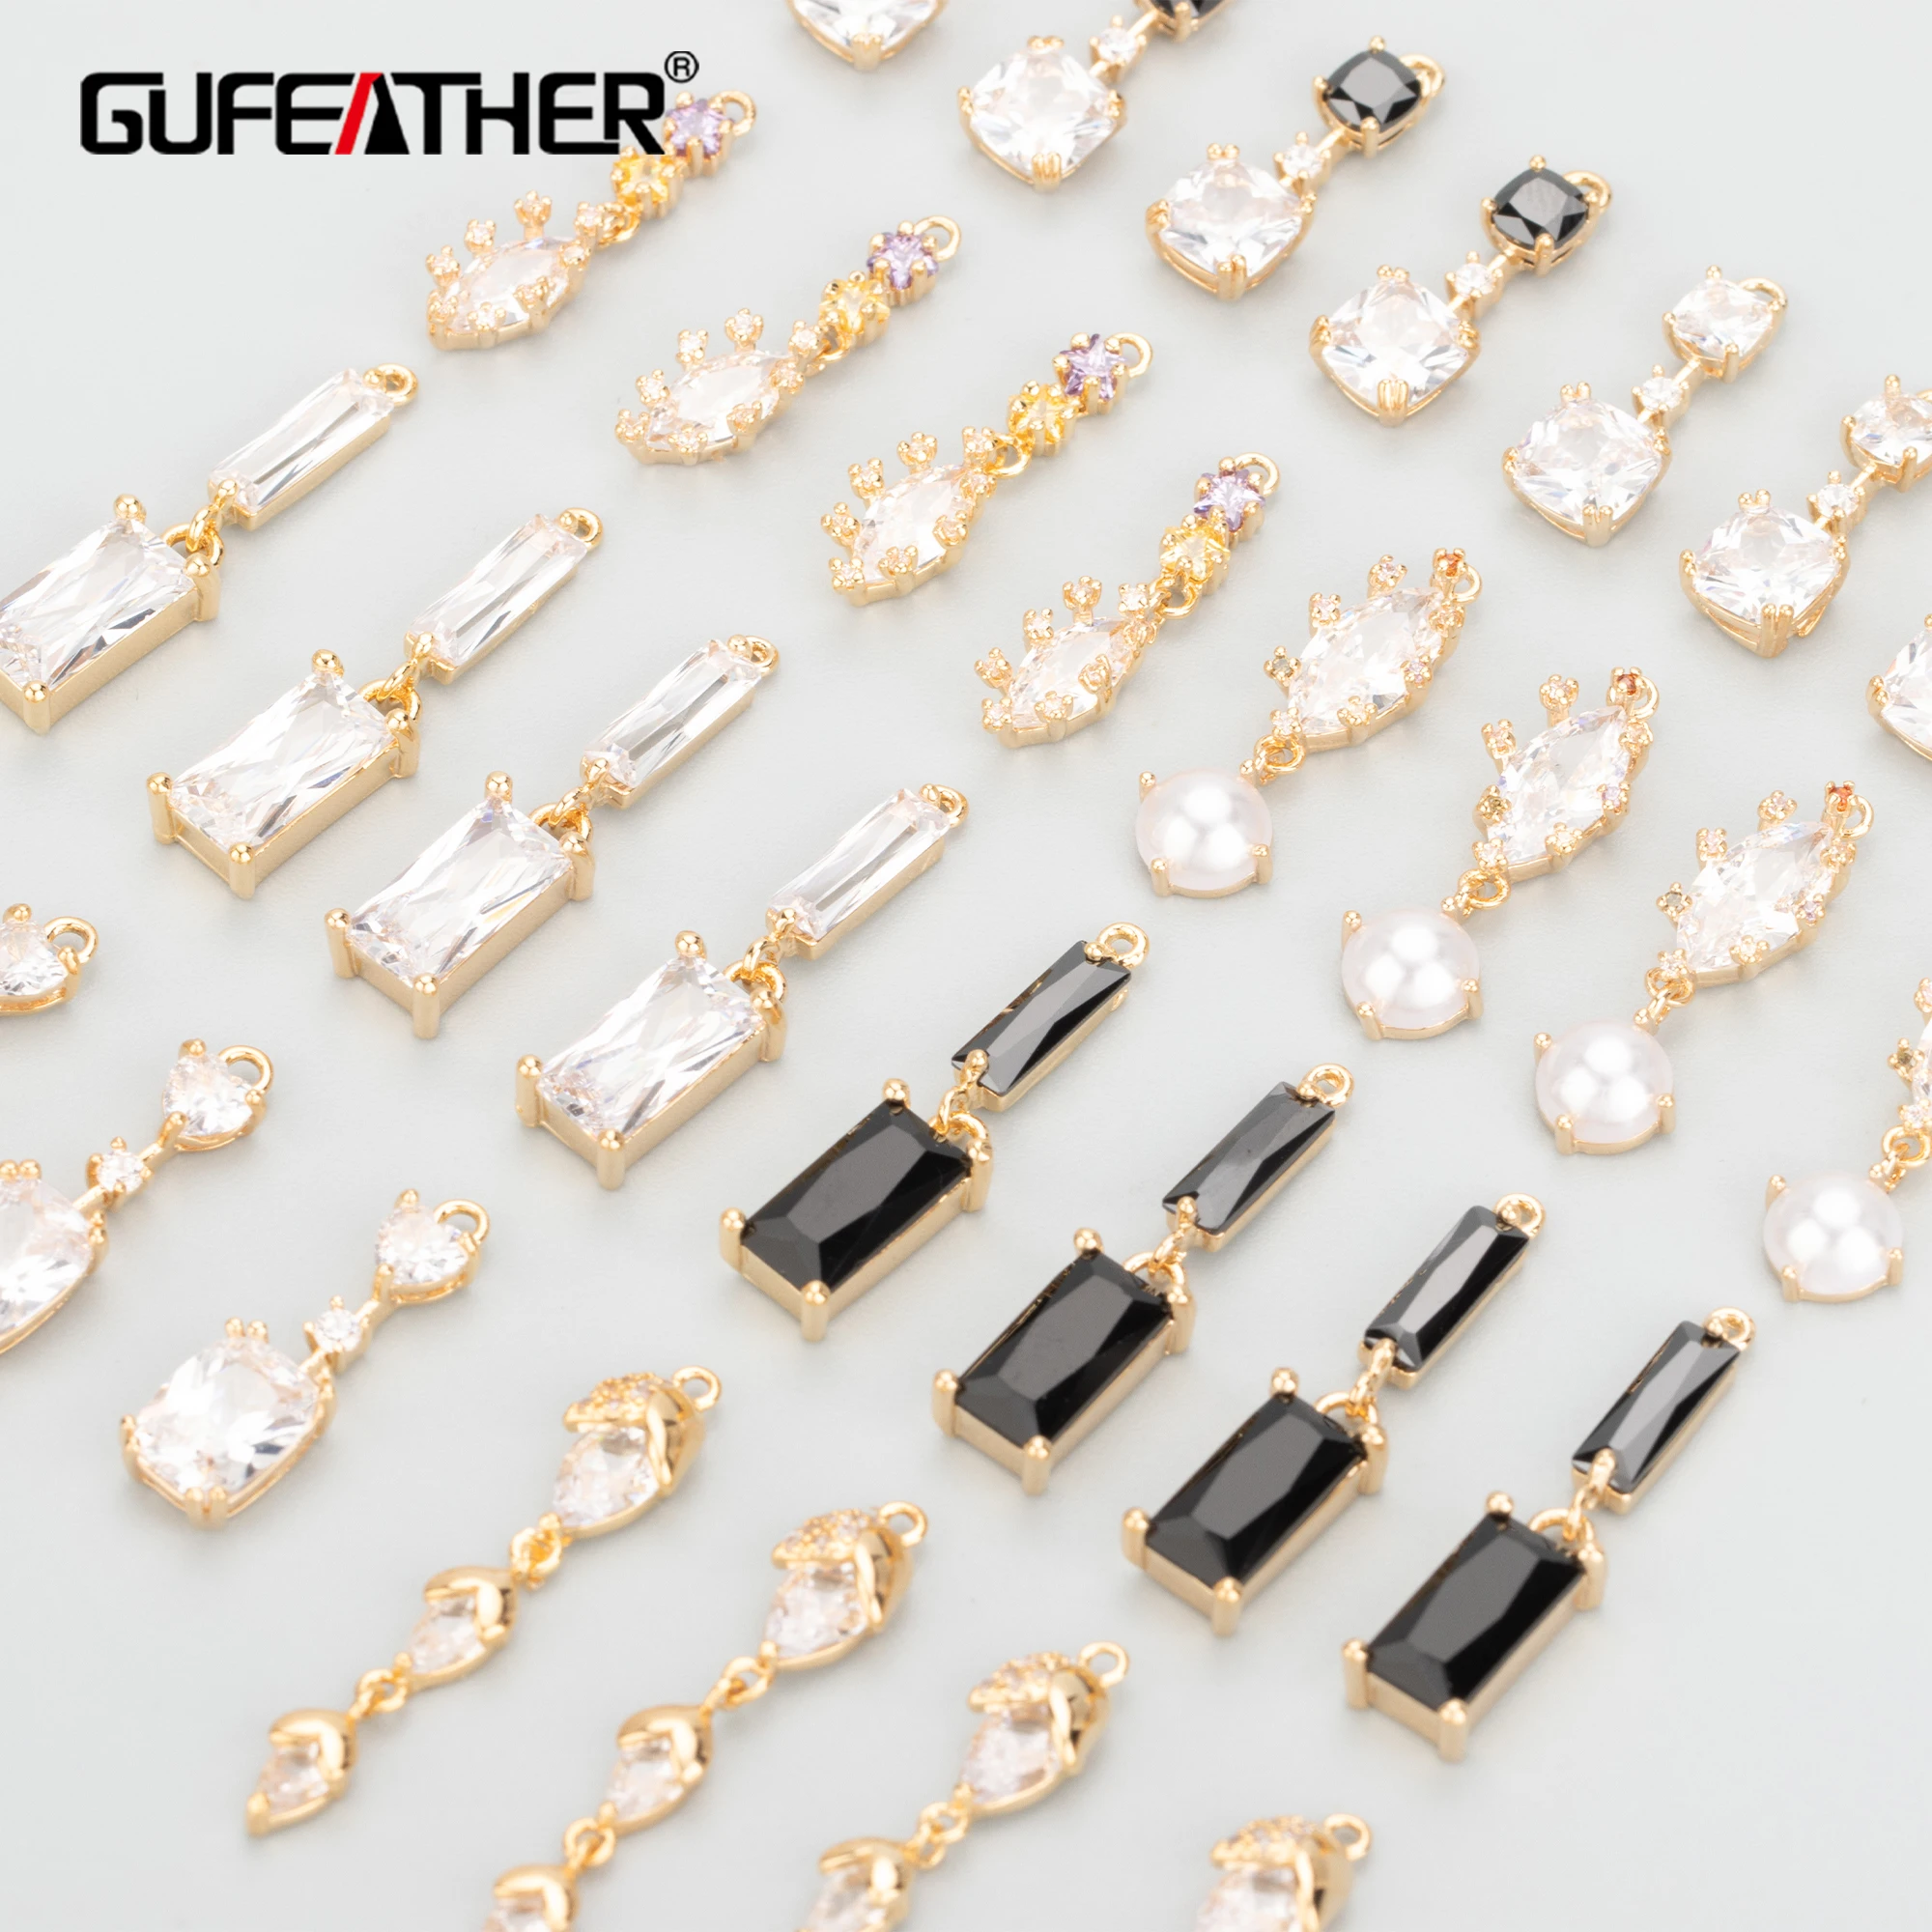 

GUFEATHER MB60,18k gold plated,nickel free,copper,zircons,glass,charms,diy pendants,diy pendants,jewelry accessories,6 pcs/lot